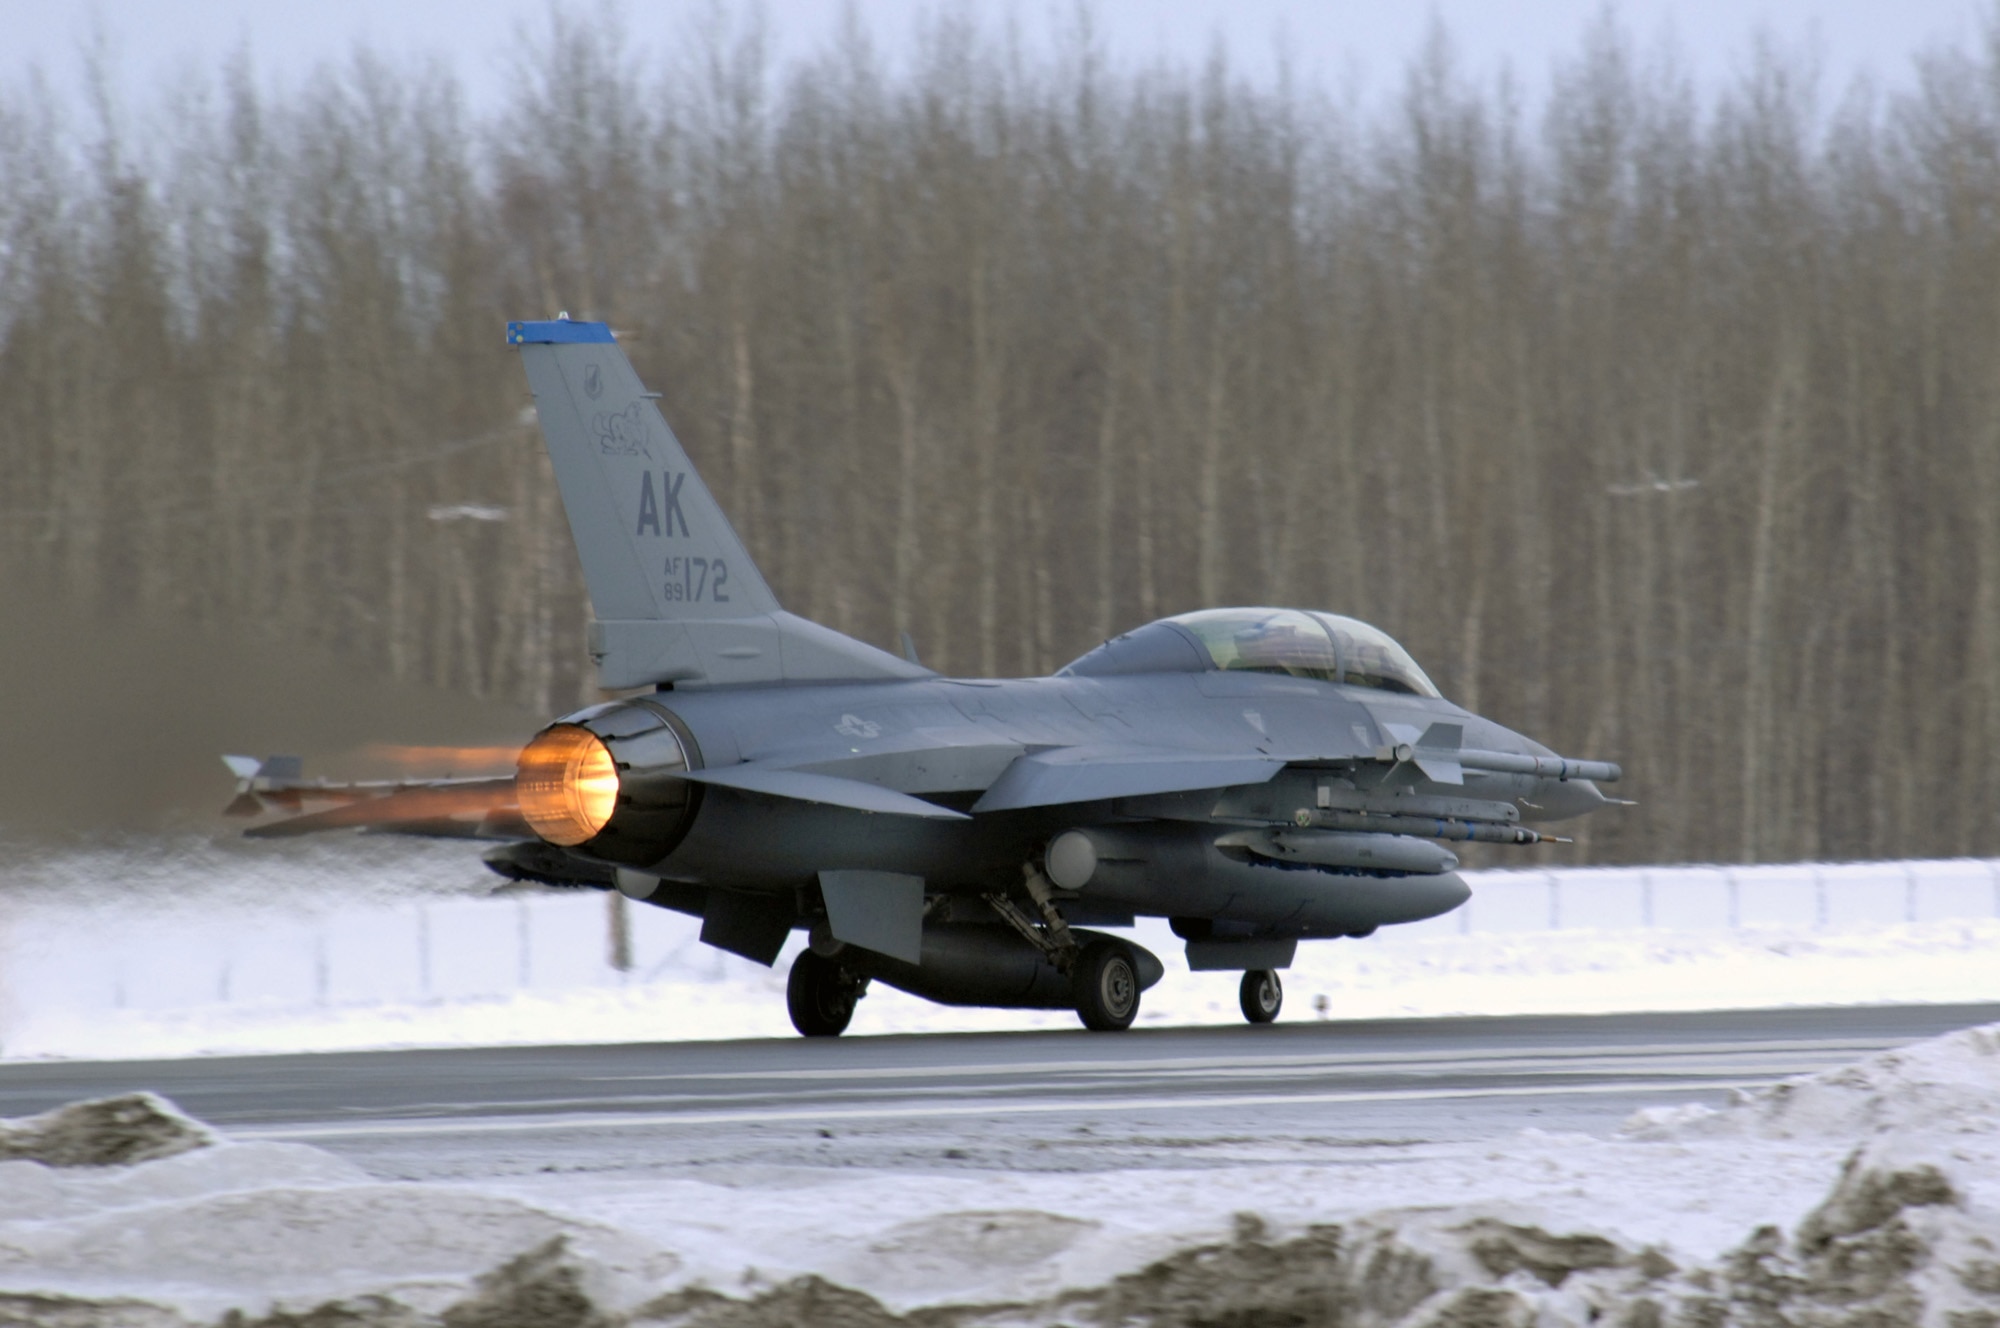 EIELSON AIR FORCE BASE, Alaska -- An F-16D Fighting Falcon aircraft from the 18th Fighter Squadron takes off from the flightline here for a training mission on Feb.8. The 18th Fighter Squadron conducts air operations for combat-ready F-16 aircraft and provides close air support, forward air control (airborne), battlefield air interdiction, and offensive counter air.
(U.S. Air Force Photo by Staff Sgt Joshua Strang)